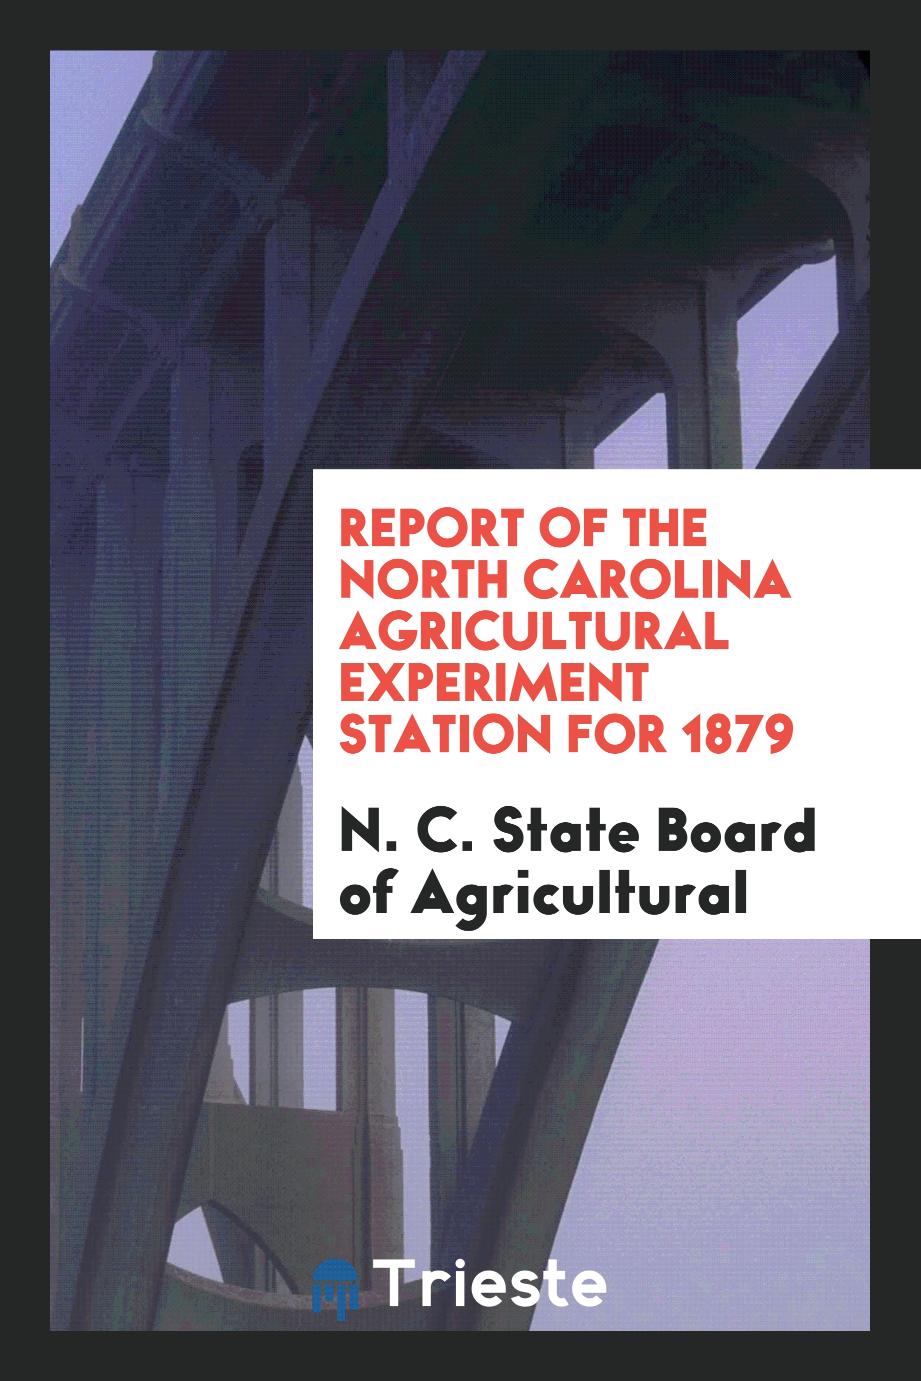 Report of the North Carolina Agricultural Experiment Station for 1879